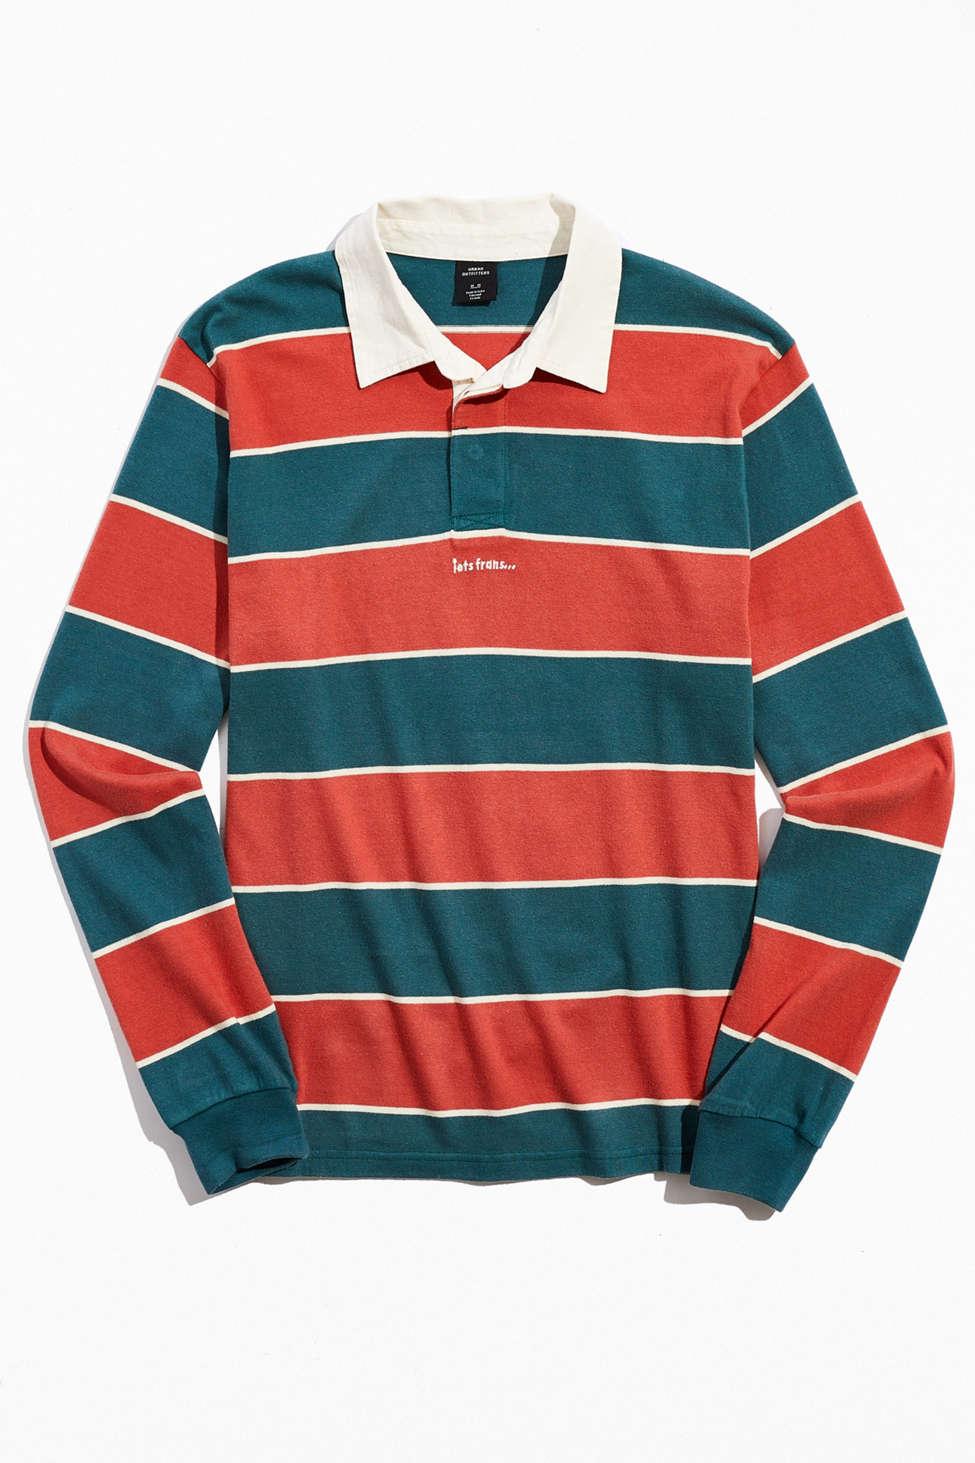 iets frans... Cotton Striped Long Sleeve Rugby Shirt in Bright Red (Red)  for Men - Lyst